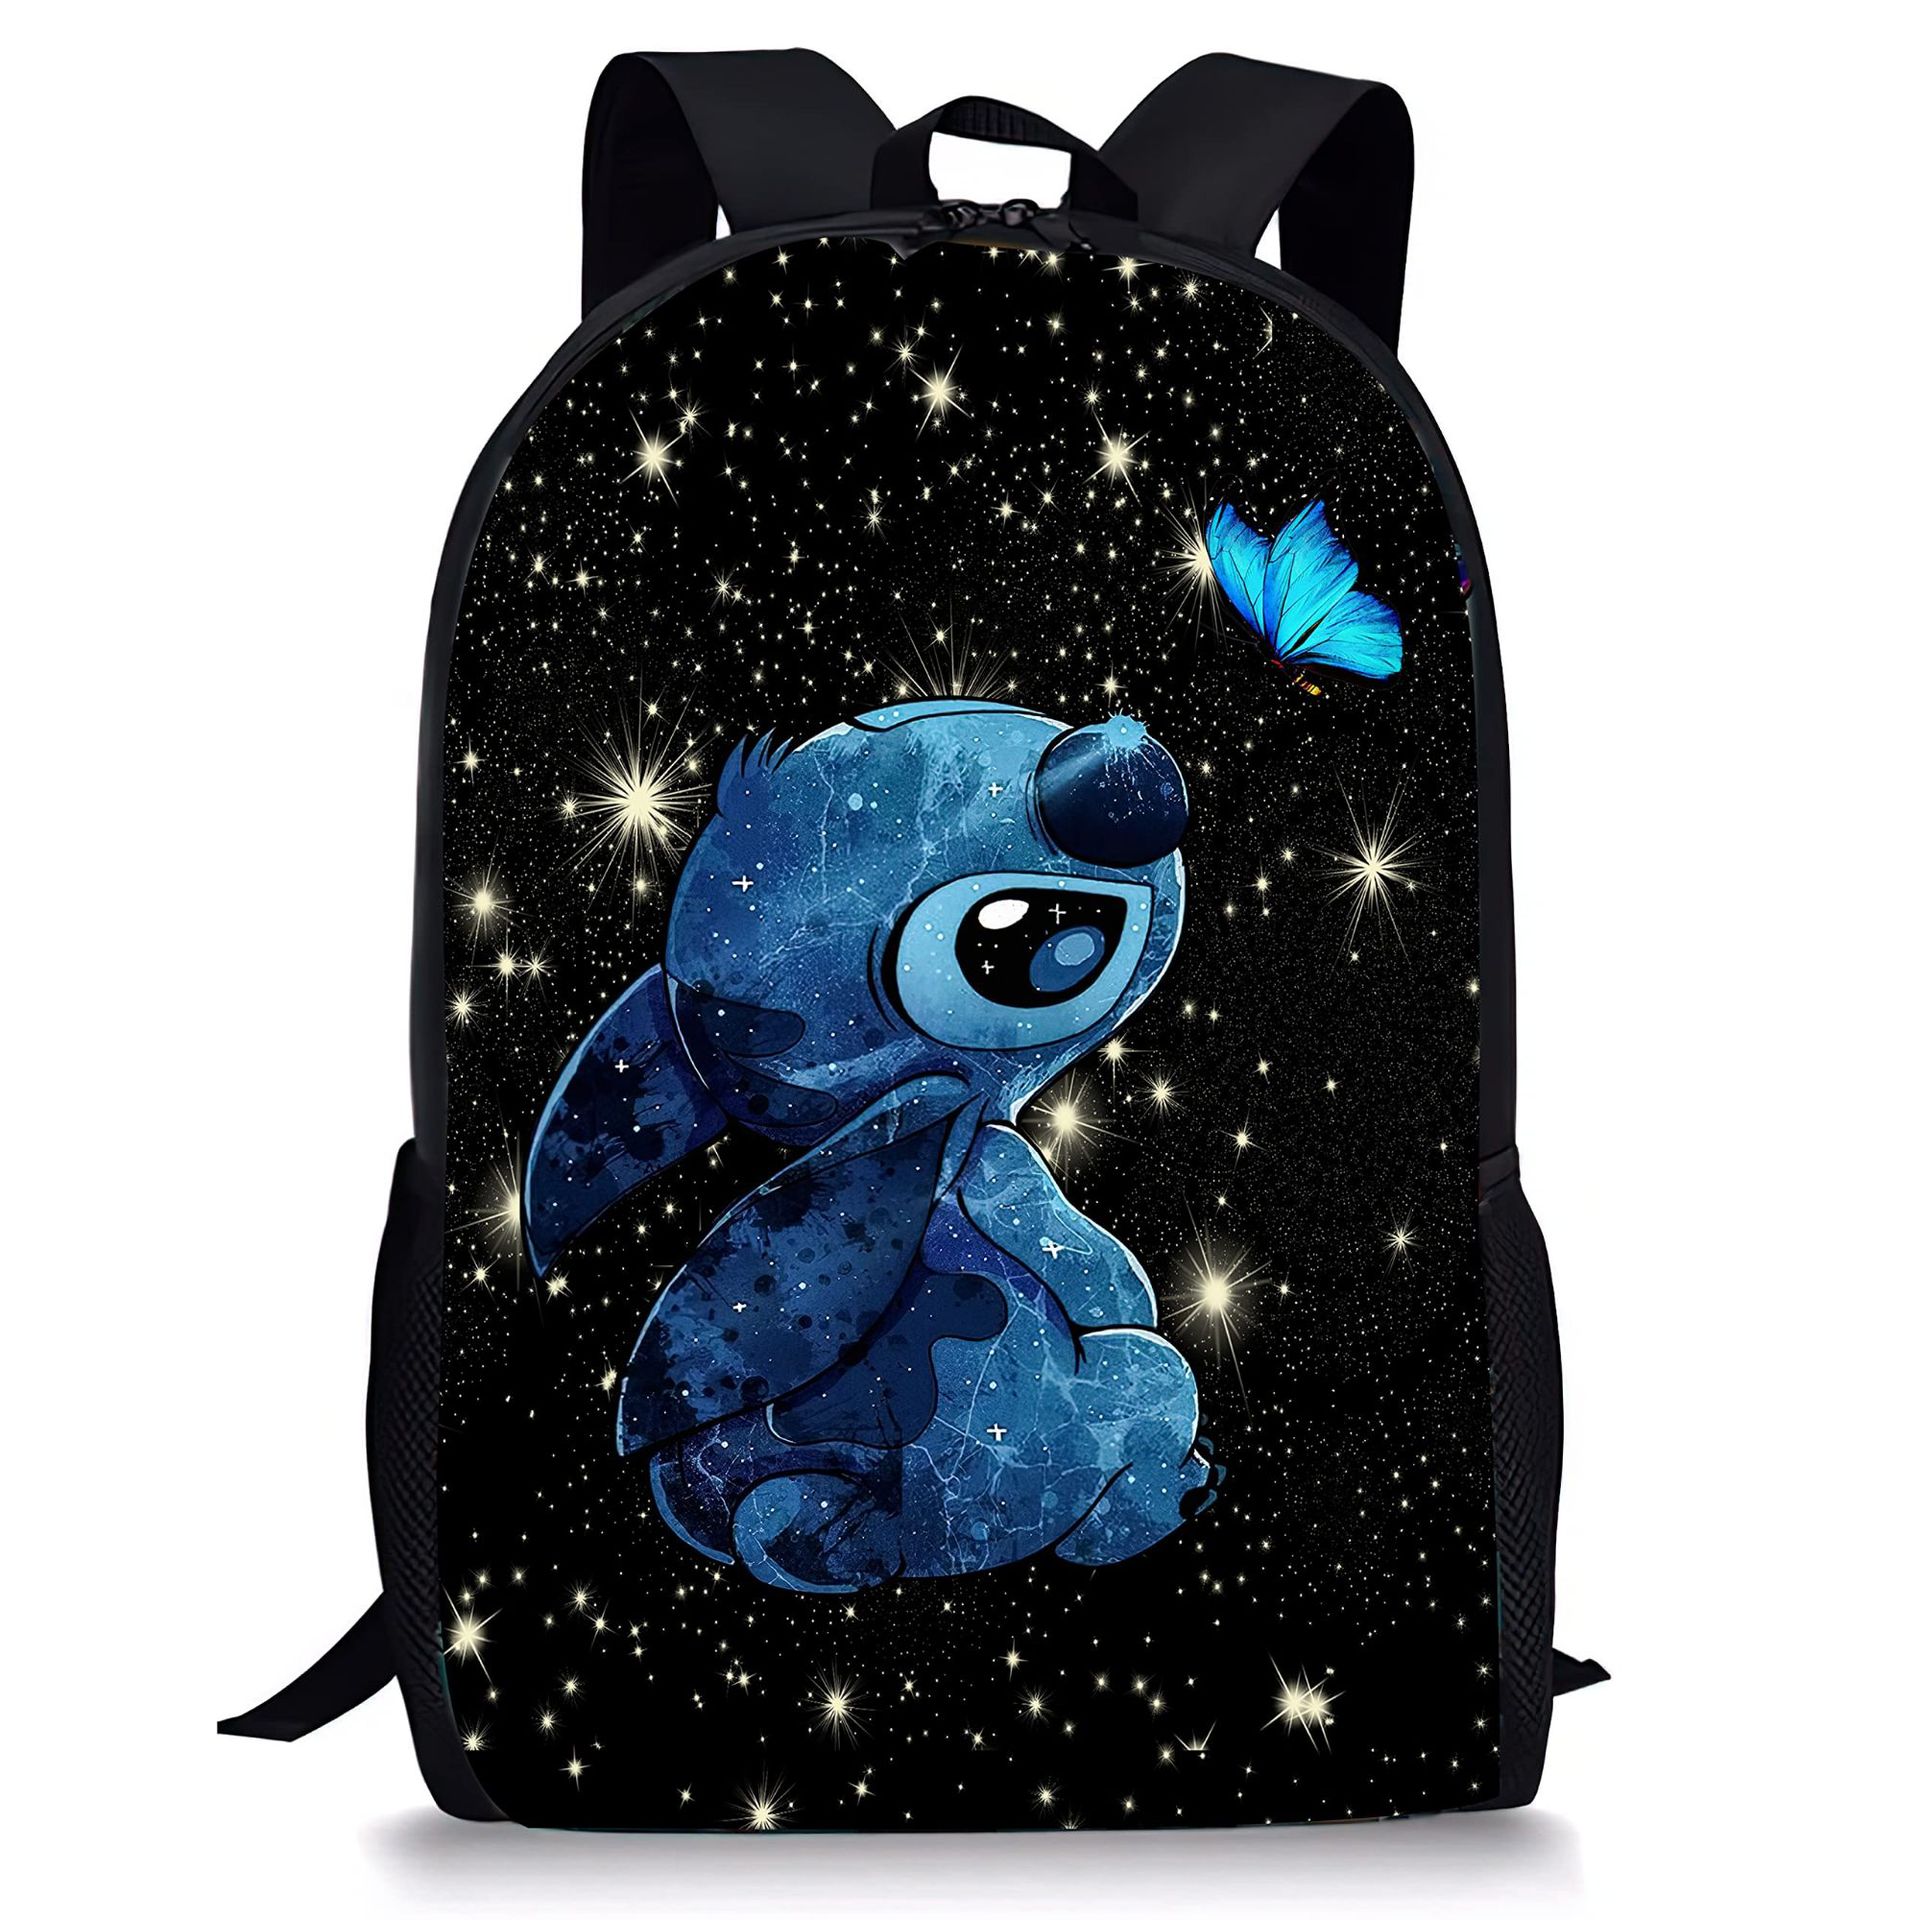 Cross-Border Schoolbag 3D Printing Stitch Primary School Student Schoolbag Stitch Backpack Cartoon Children Backpack Can Be Sent on Behalf